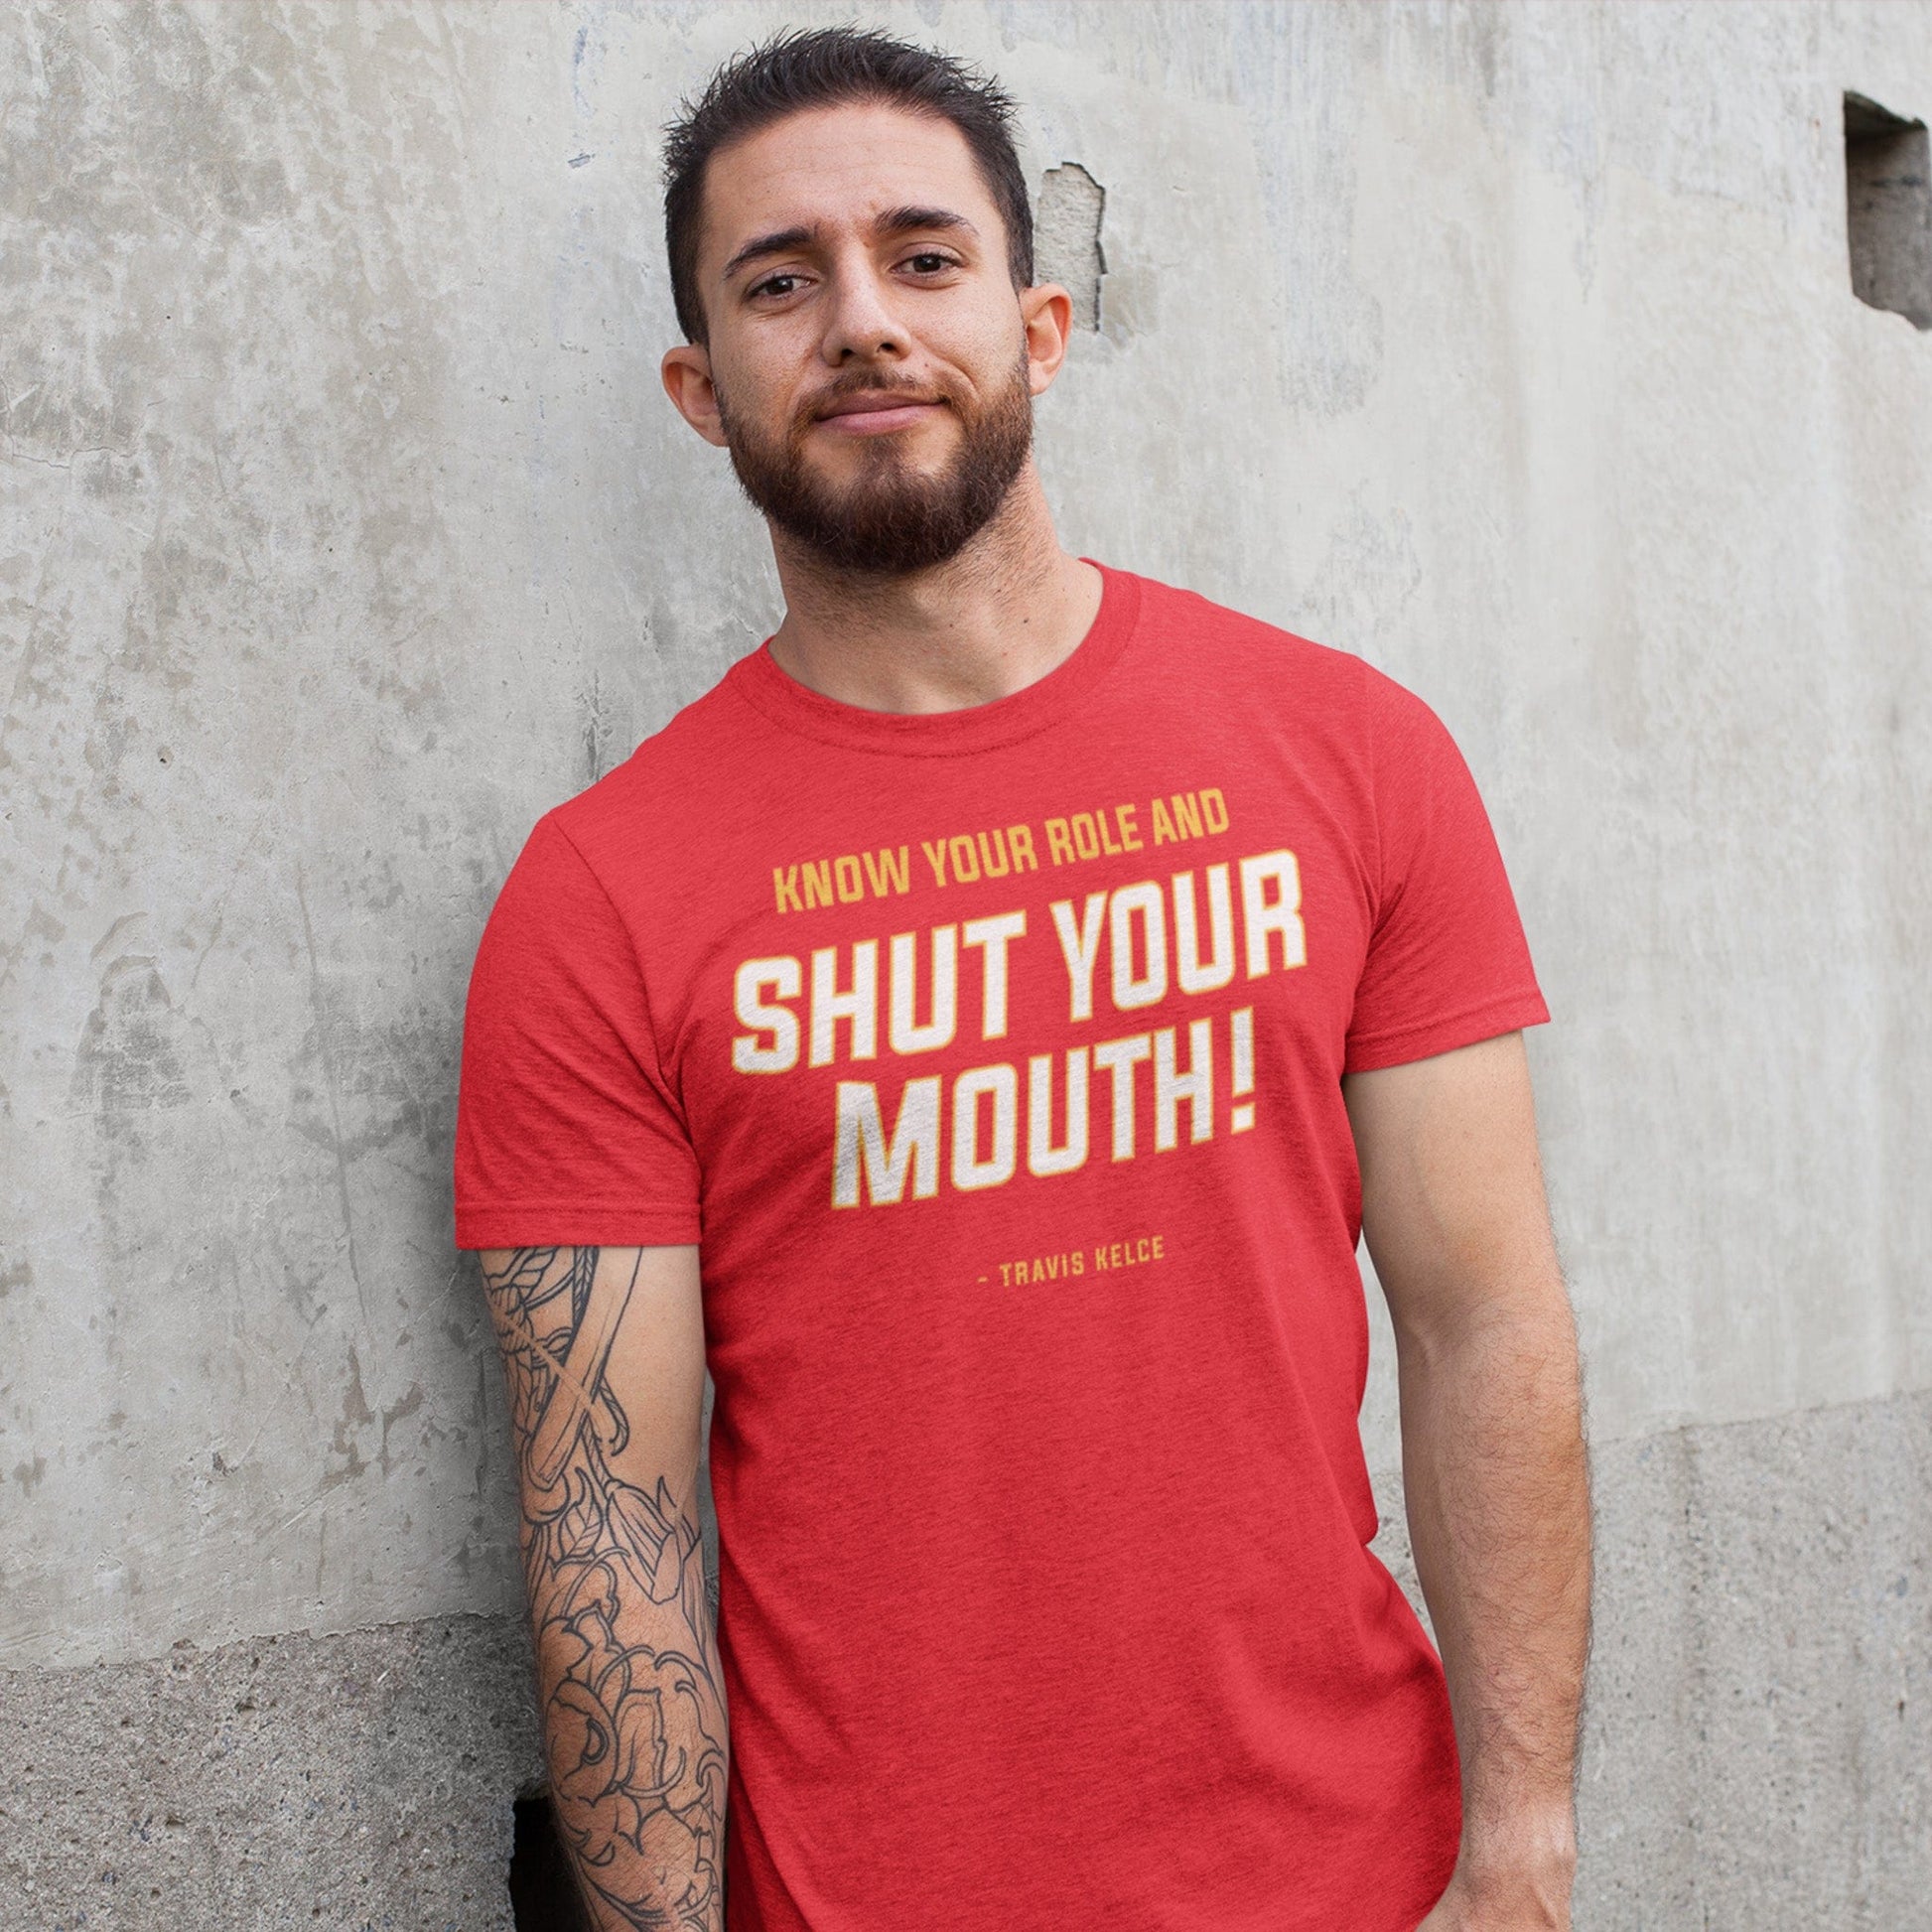 KC Swah Kansas City Chiefs red, yellow, white SHUT YOUR MOUTH on heather red unisex t-shirt worn by male model standing against concrete wall